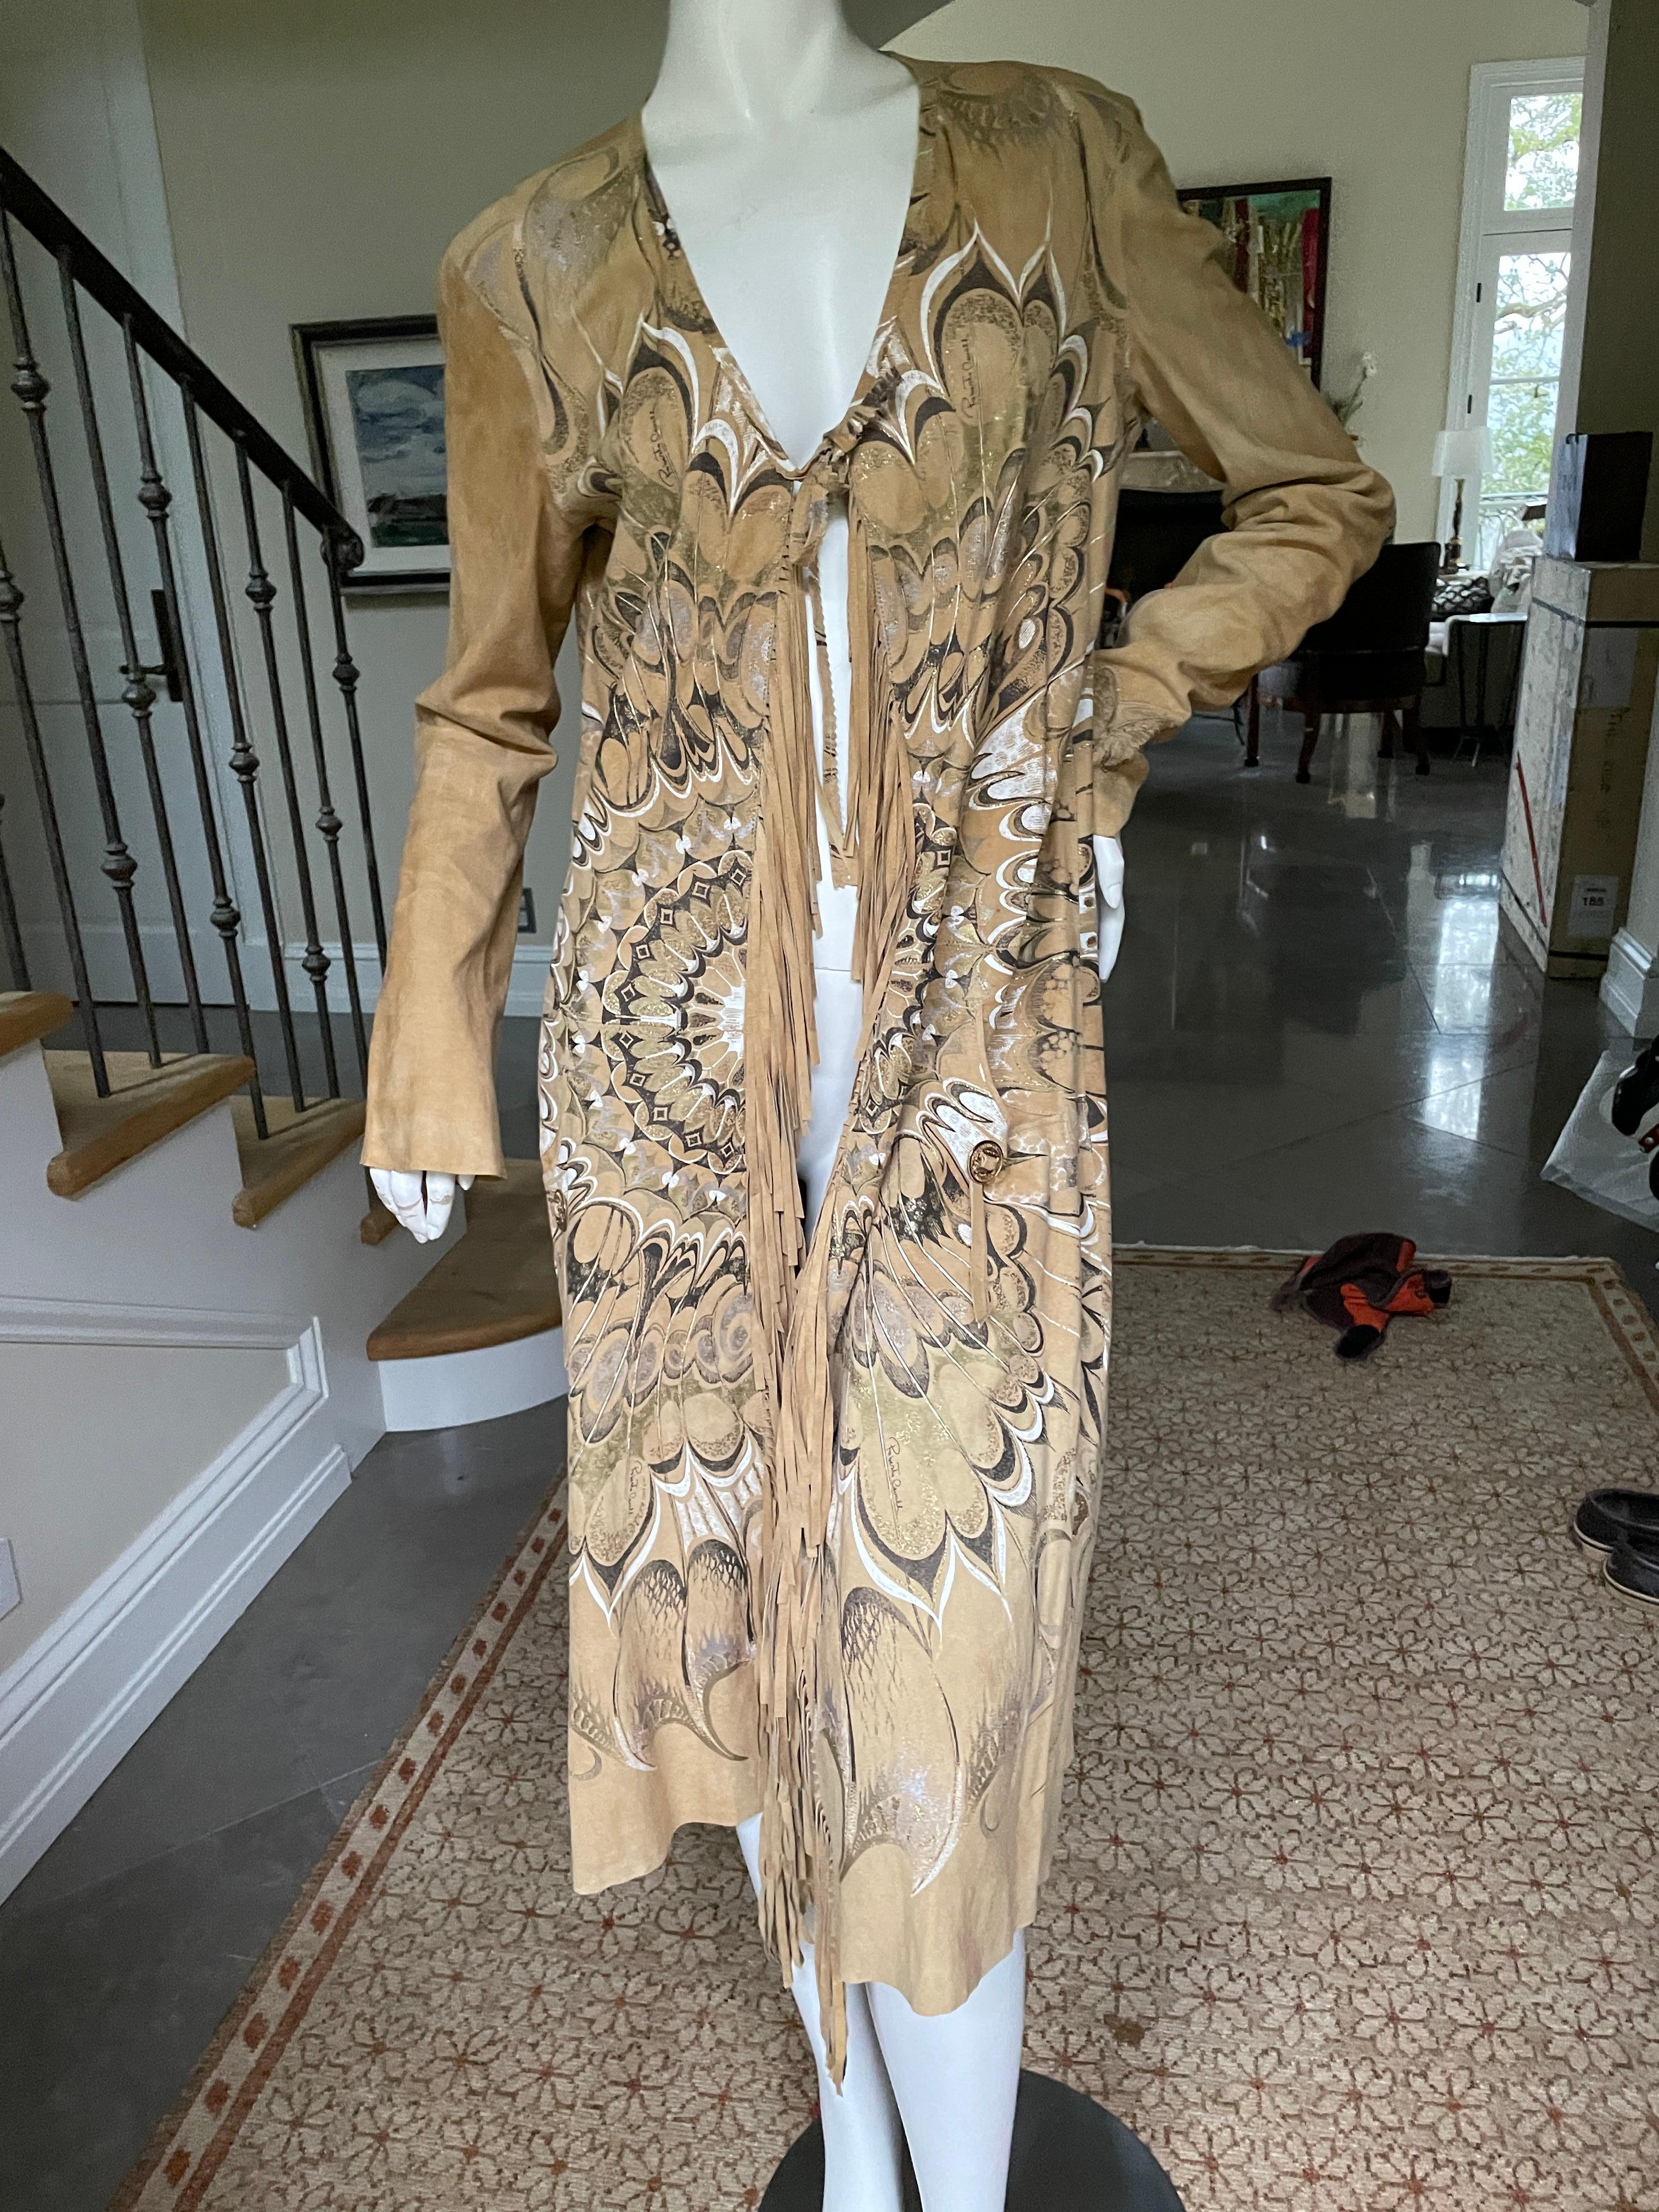 Roberto Cavalli Collectable Spring 2004 Fringed Suede Rich Hippie Coat
This is exquisite, the photos don't quite capture the richness .
Size M
Bust 38